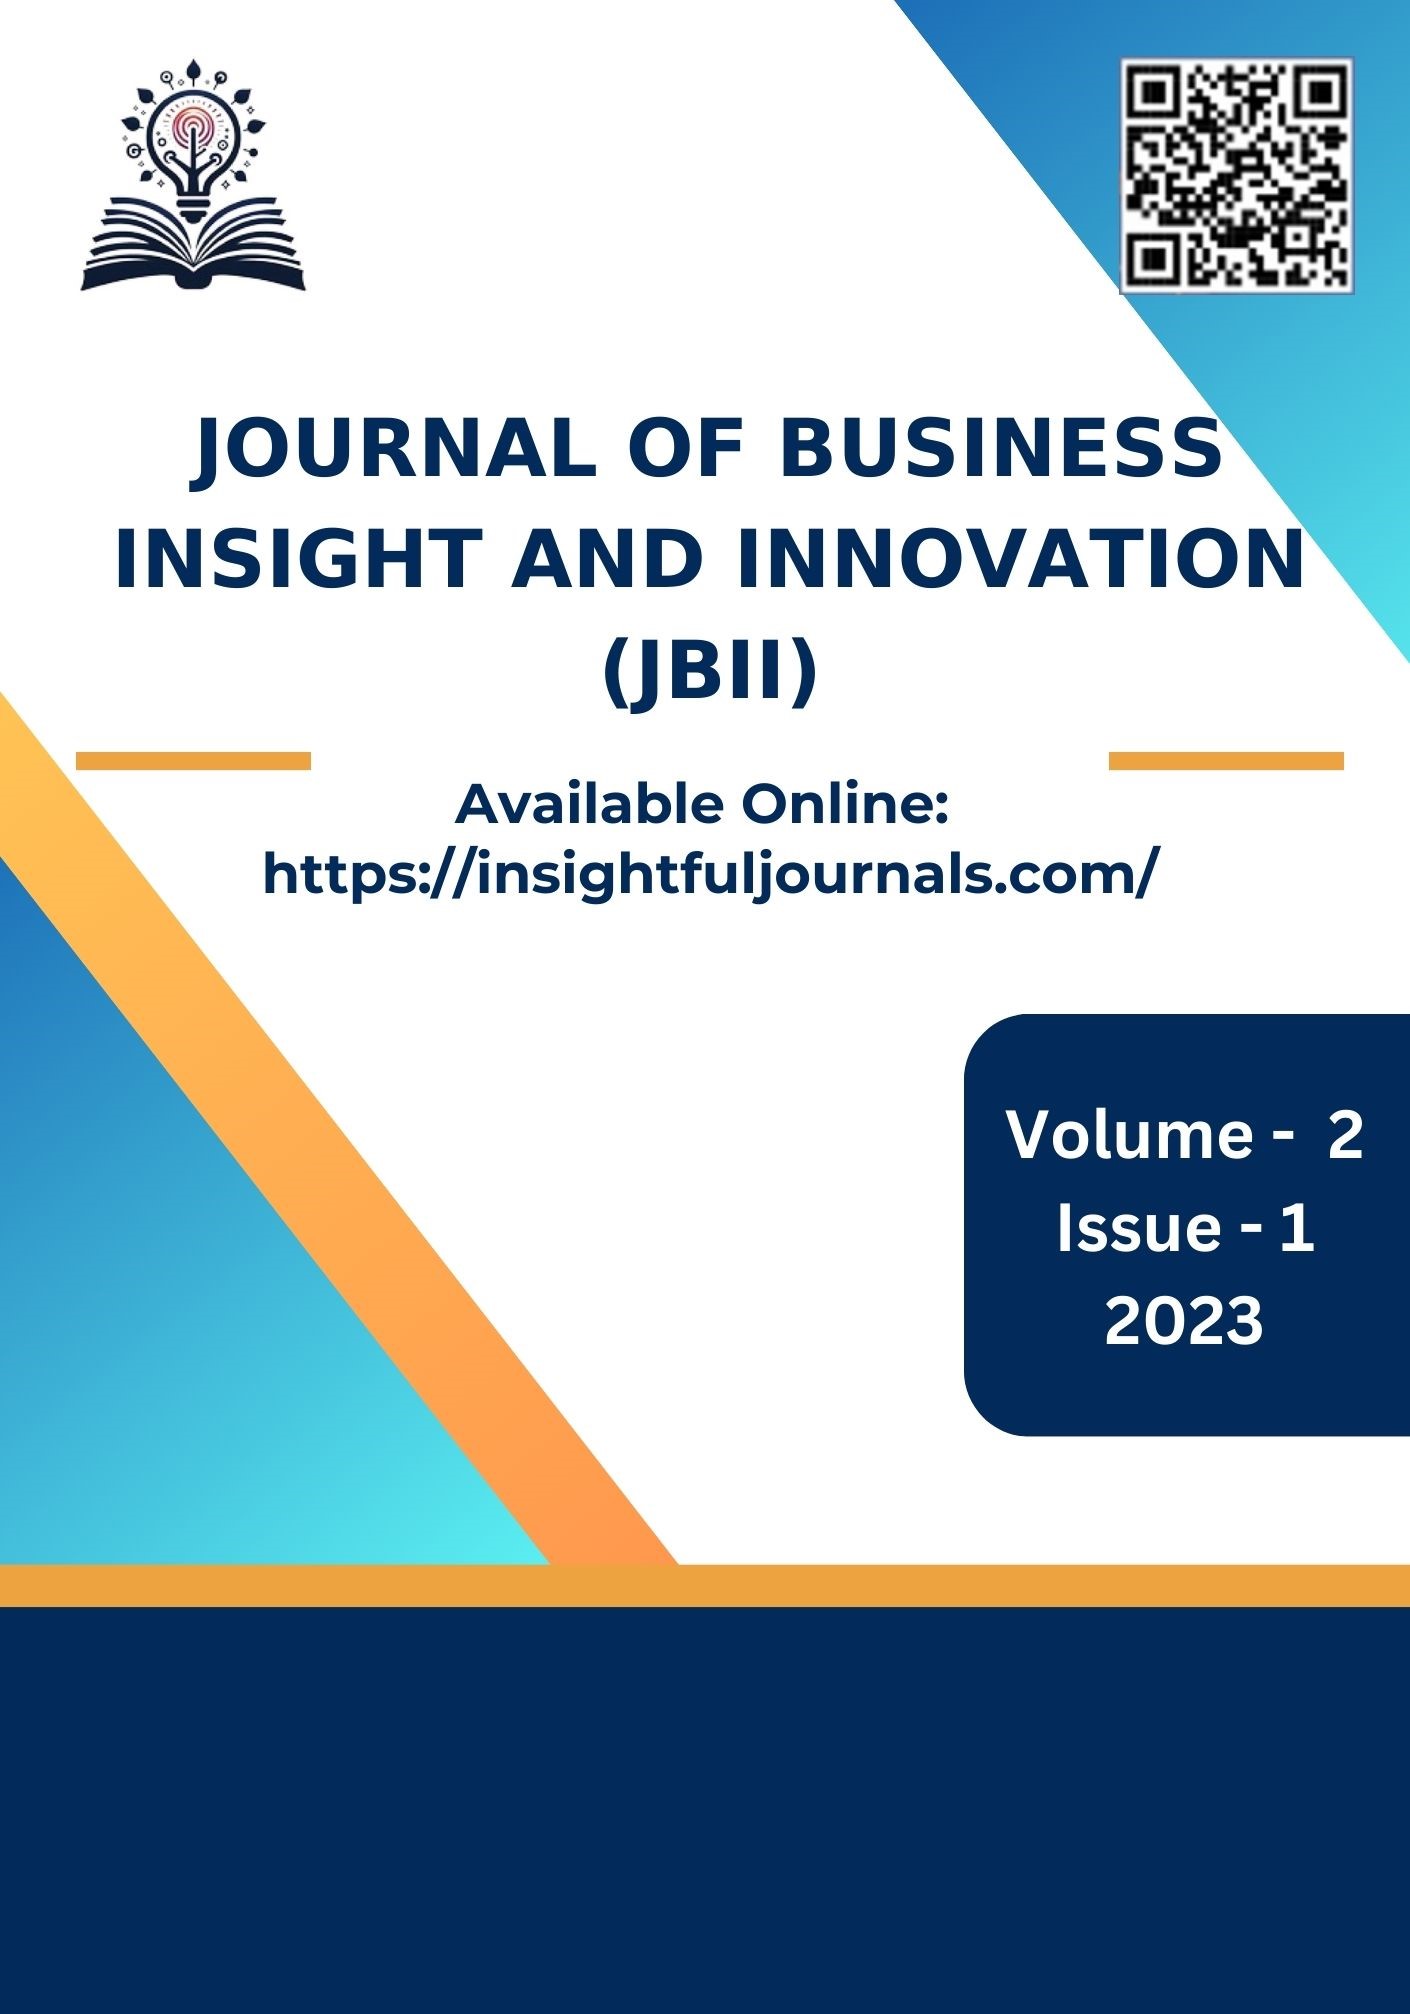 					View Vol. 2 No. 1 (2023): Journal of Business Insight and Innovation
				